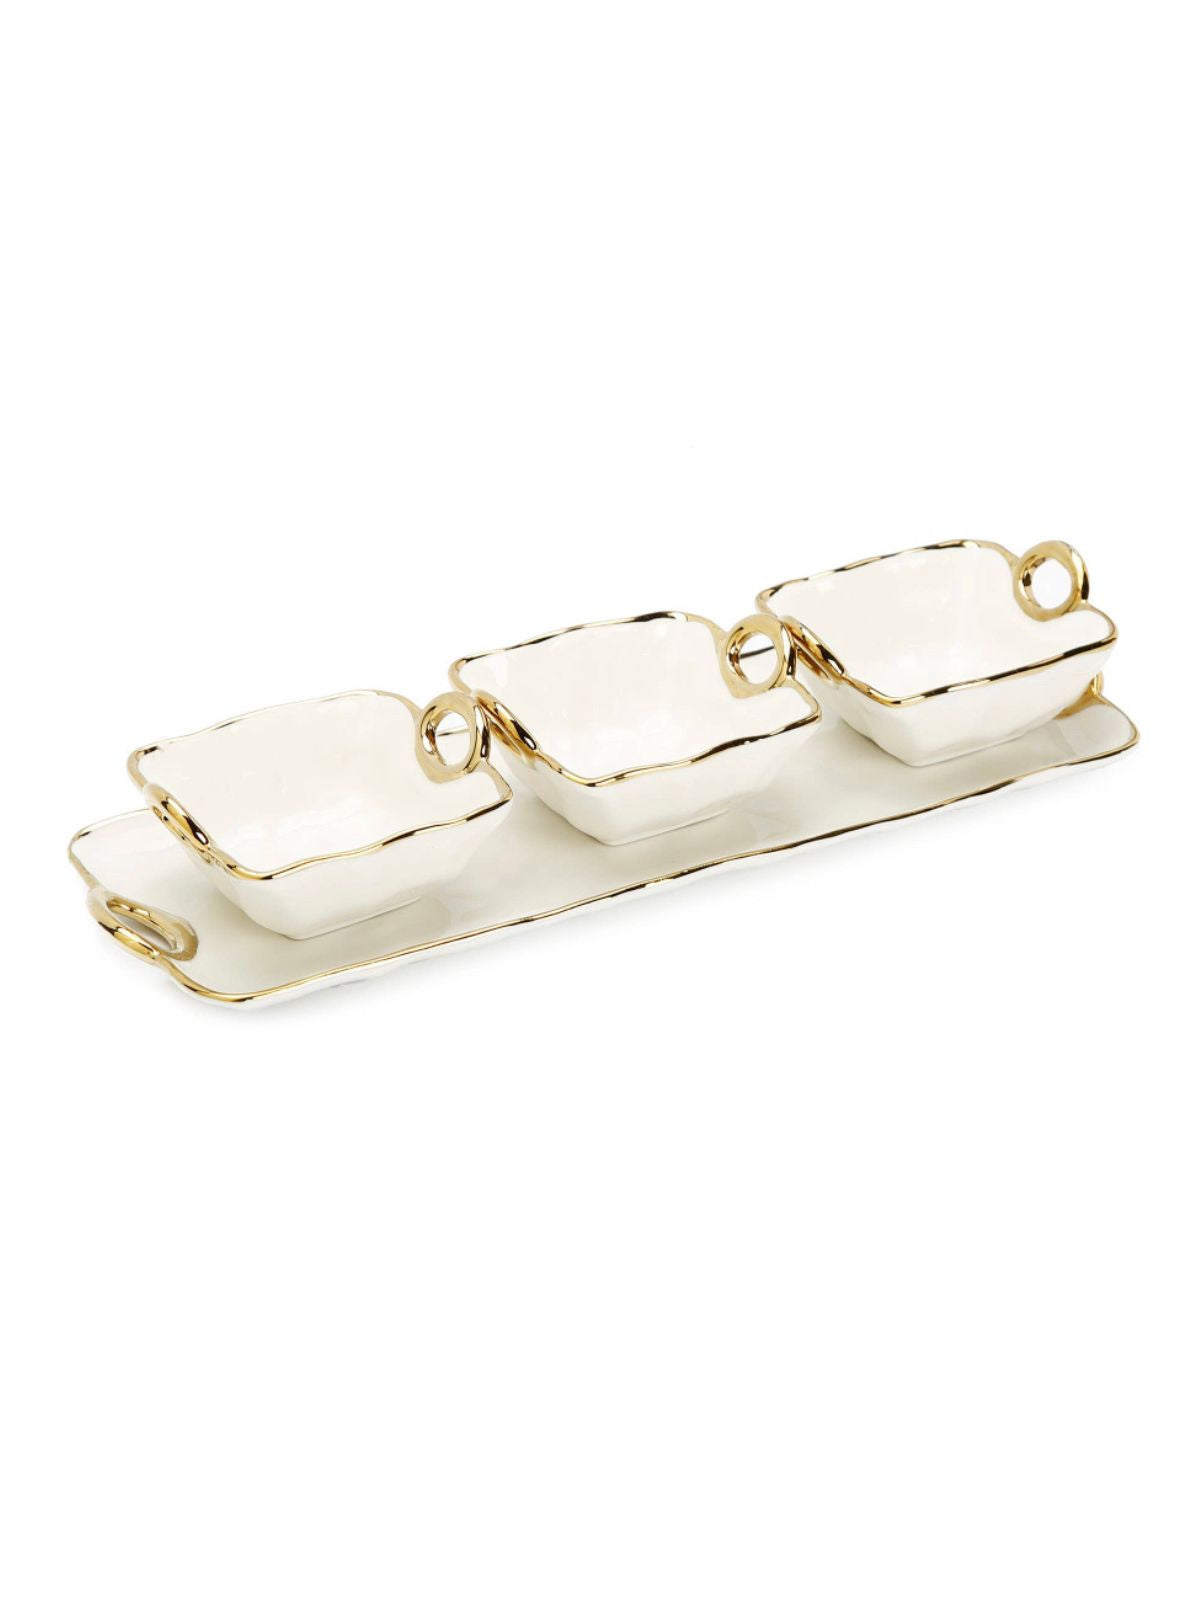 15L White Porcelain Dish with 3 Bowls and Gold Handles. Sold by KYA Home Decor.   